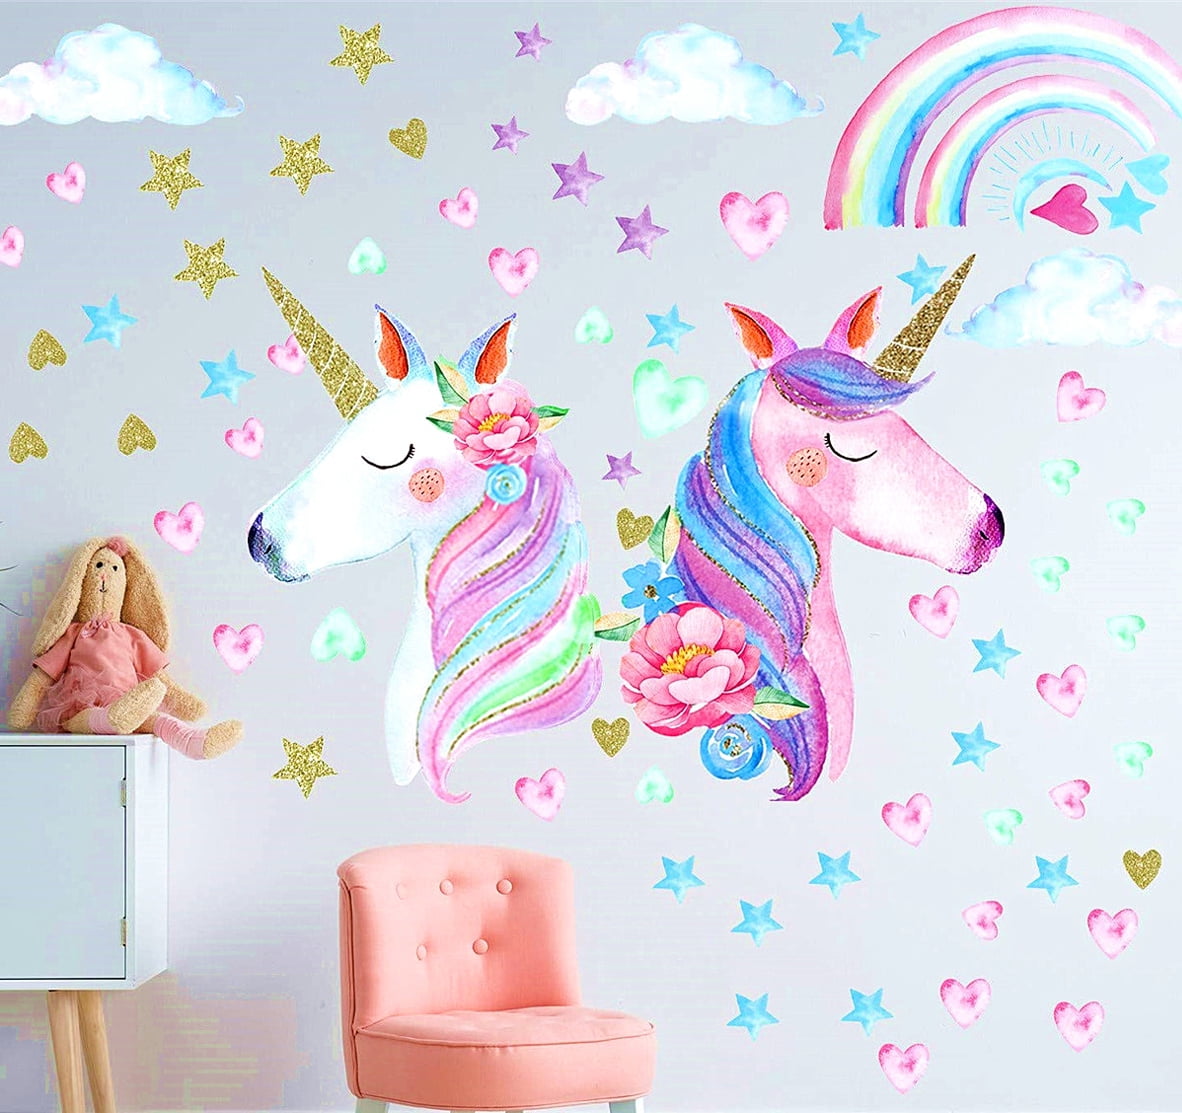 Coloured Glow in the Dark Unicorn Wall Bedroom Decoration Stickers or Party Bag 